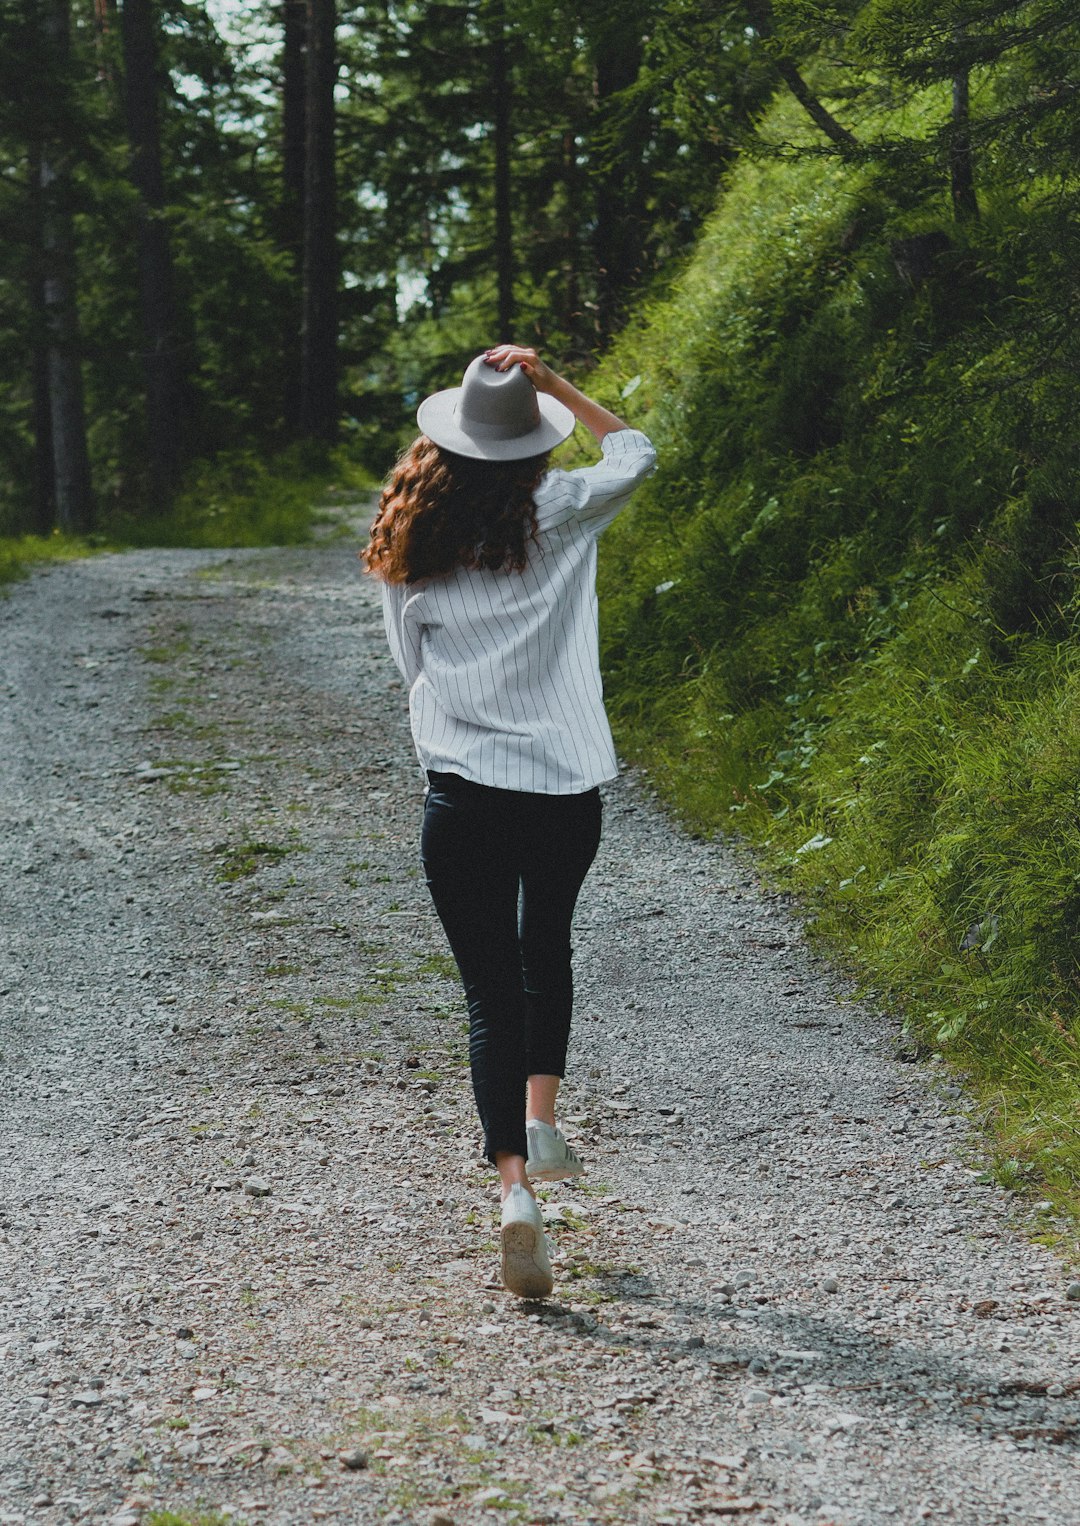 woman in white long sleeve shirt and black pants walking on dirt road during daytime